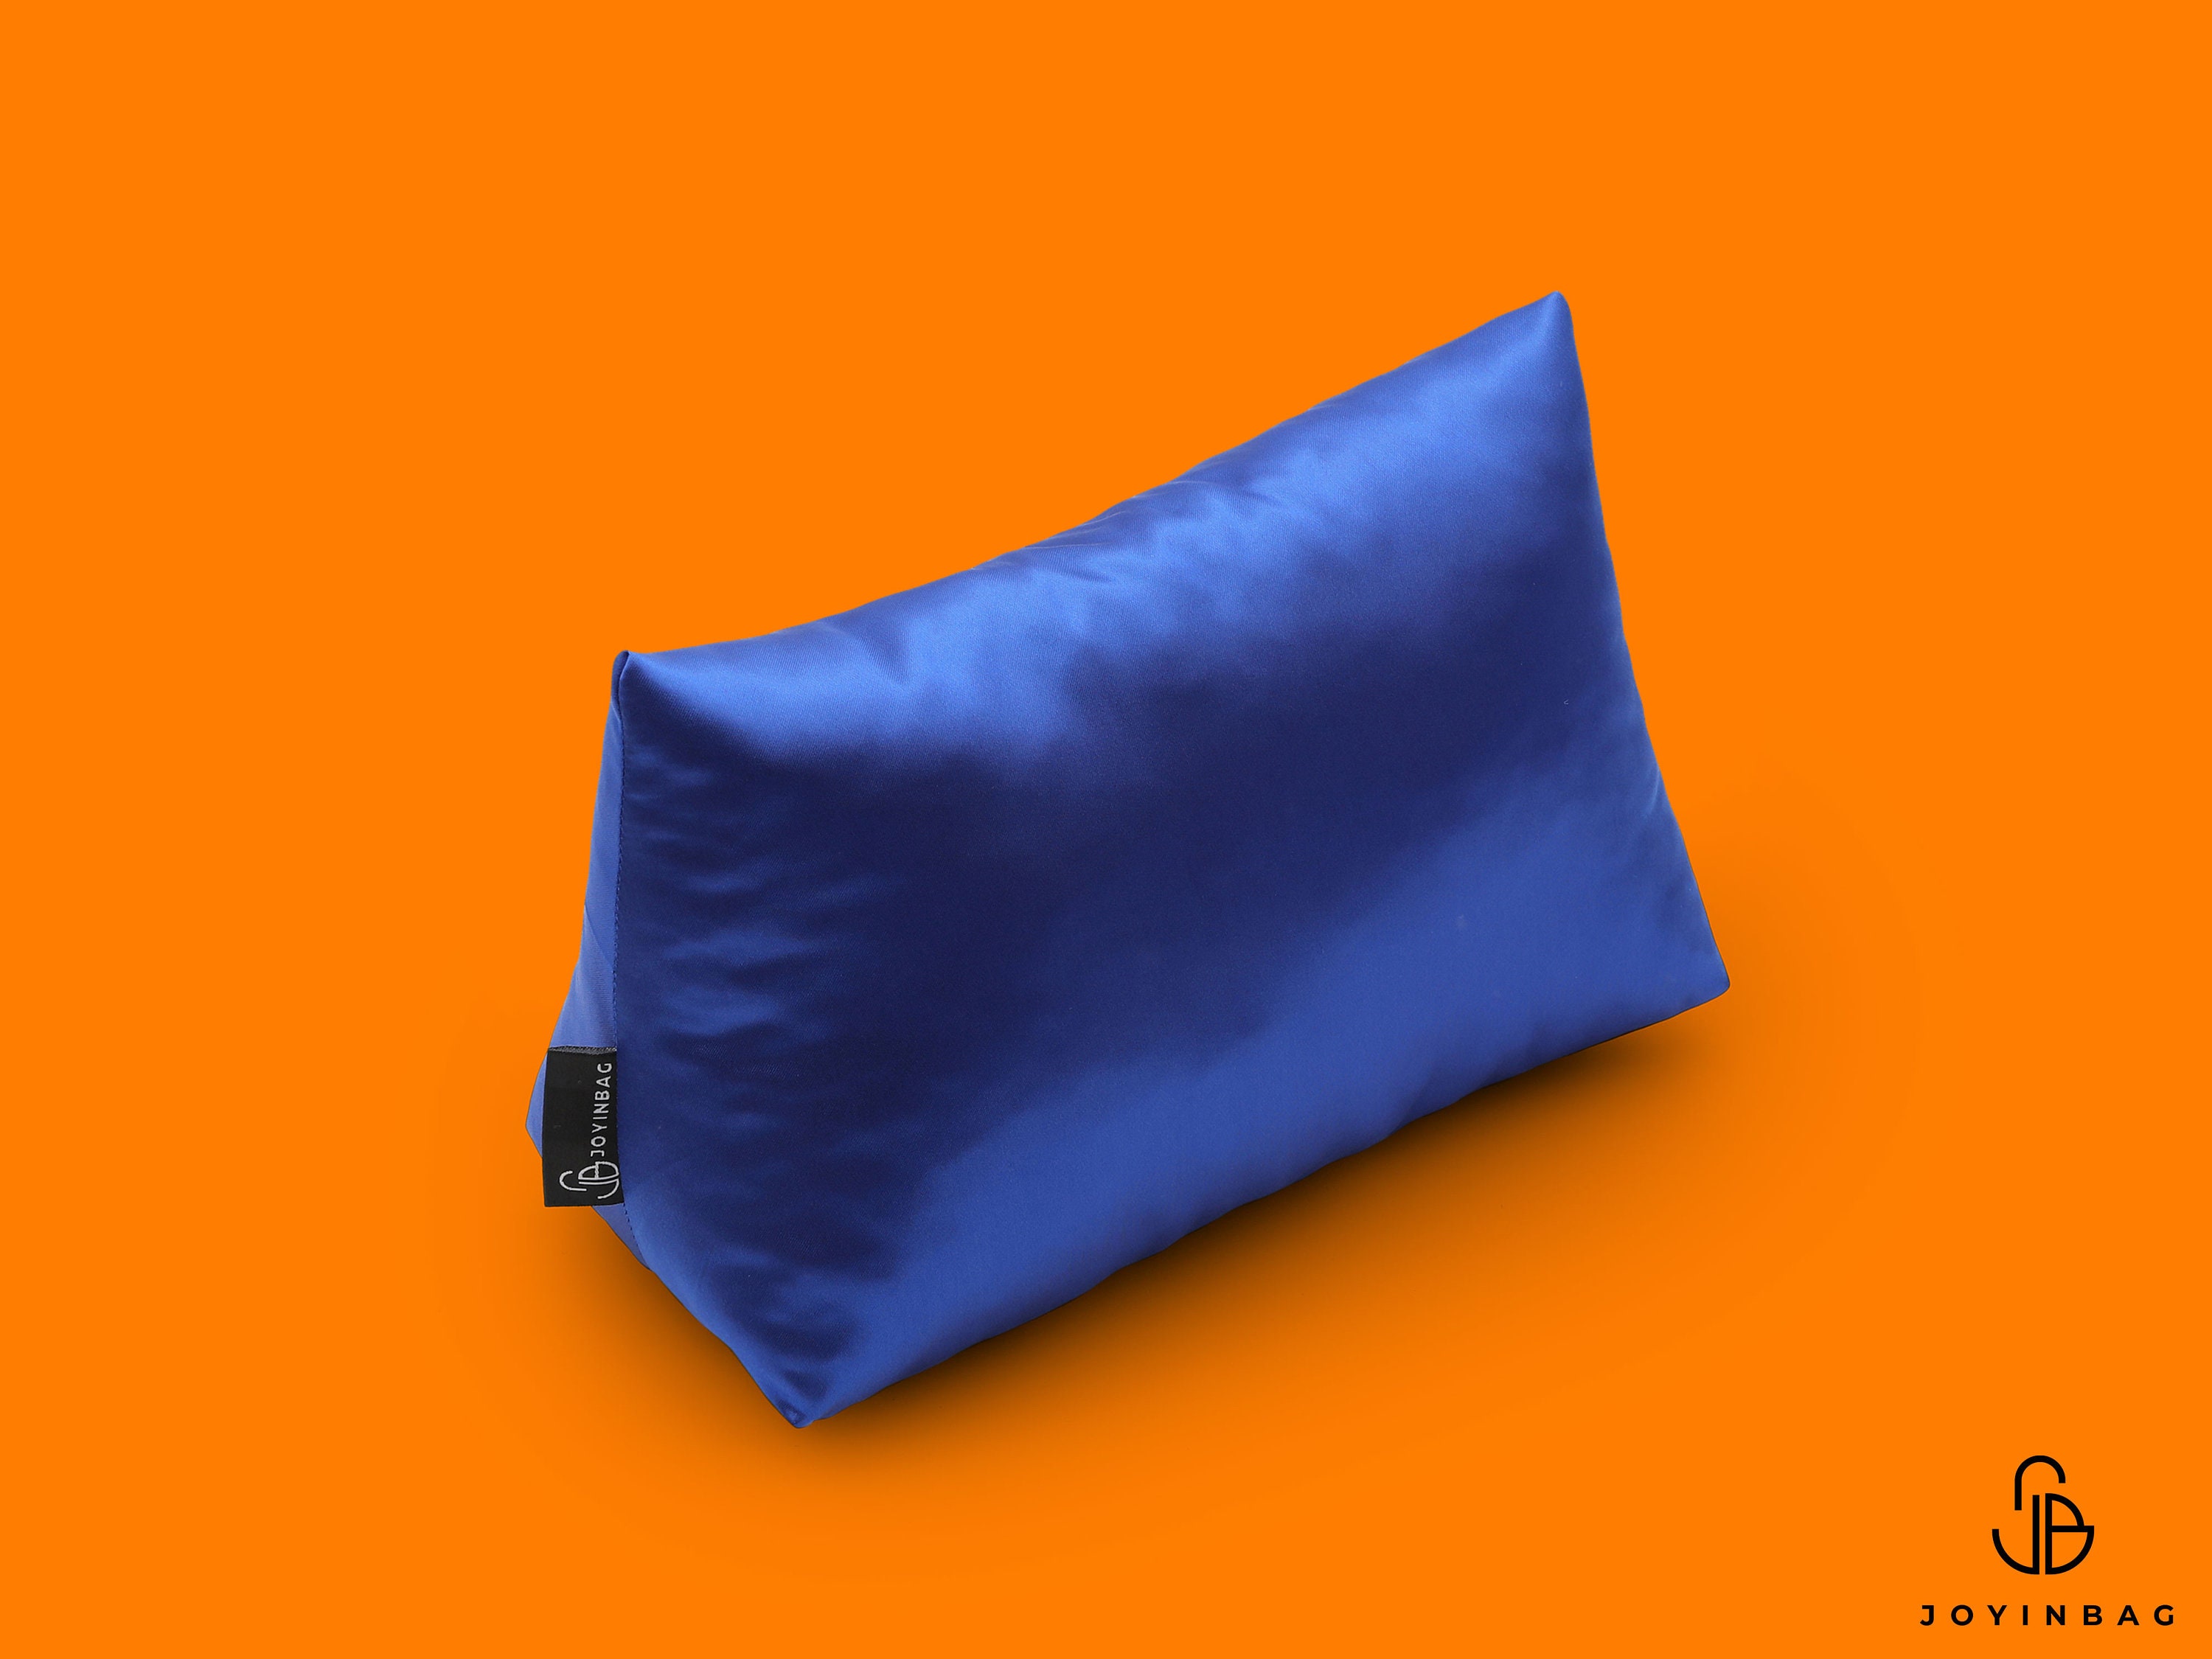  Satin Pillow Luxury Bag Shaper Compatible for the Designer Bag  Bl. Part Time : Handmade Products